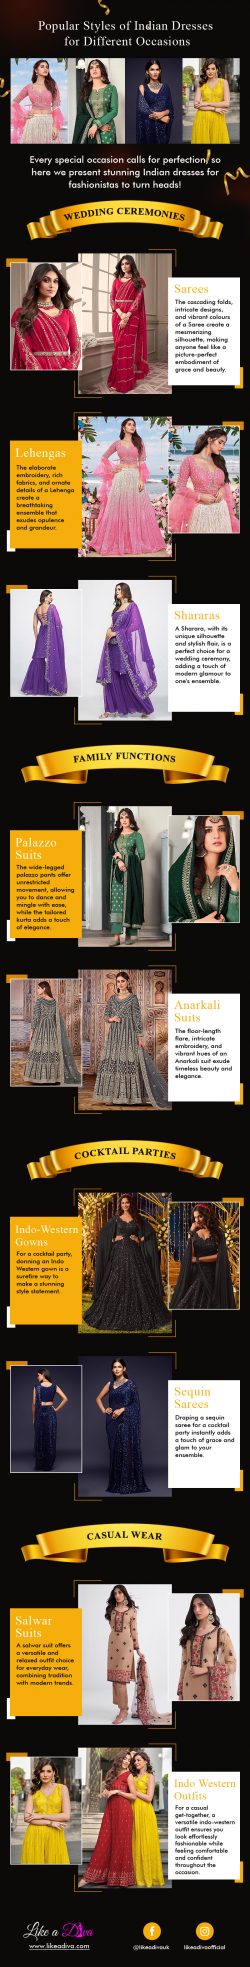 Styles of Indian Dresses for Different Occasions